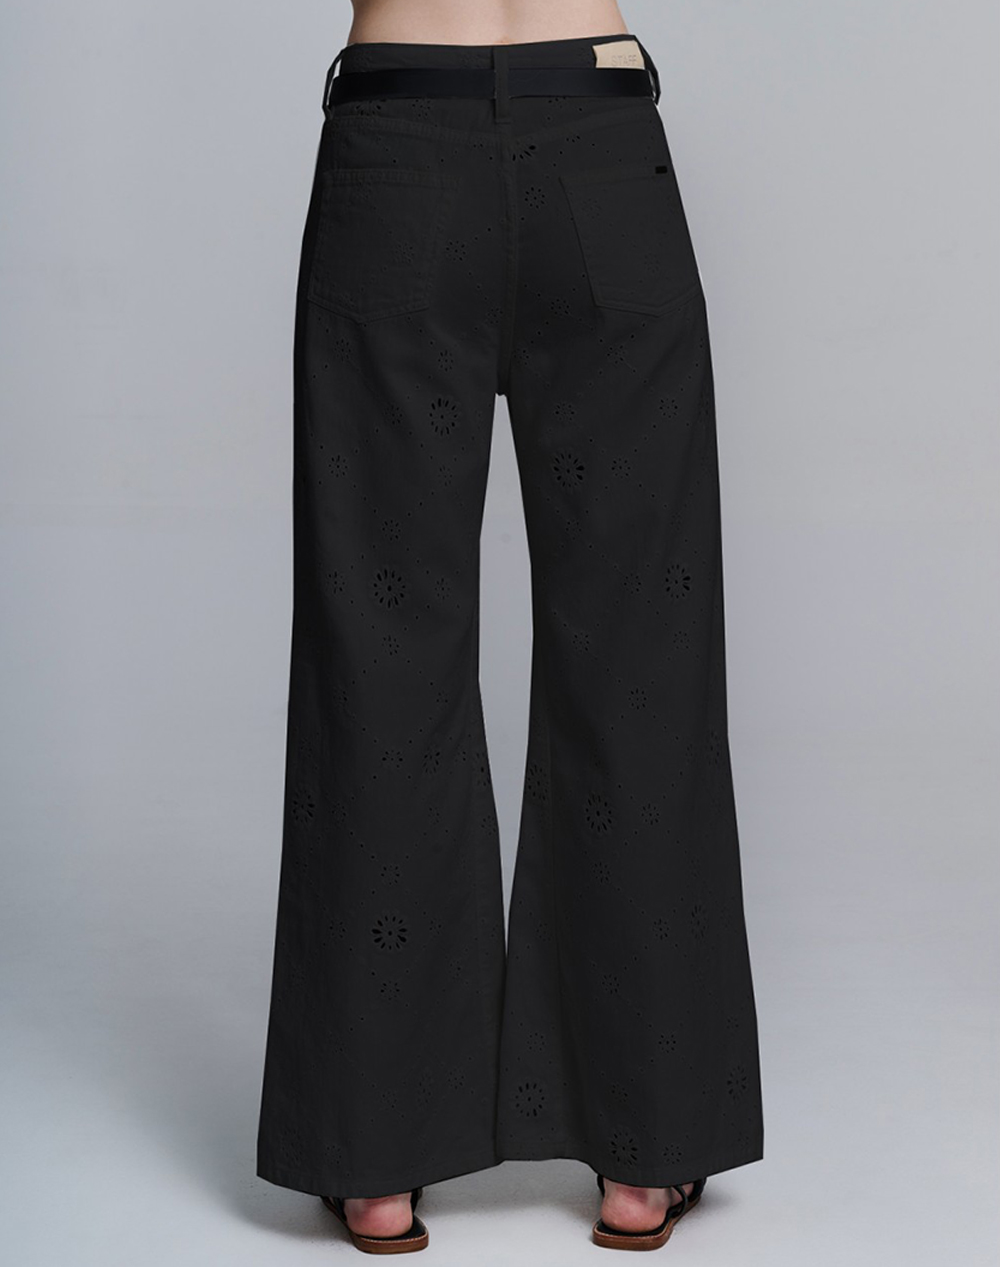 STAFF Lovely Woman Pant